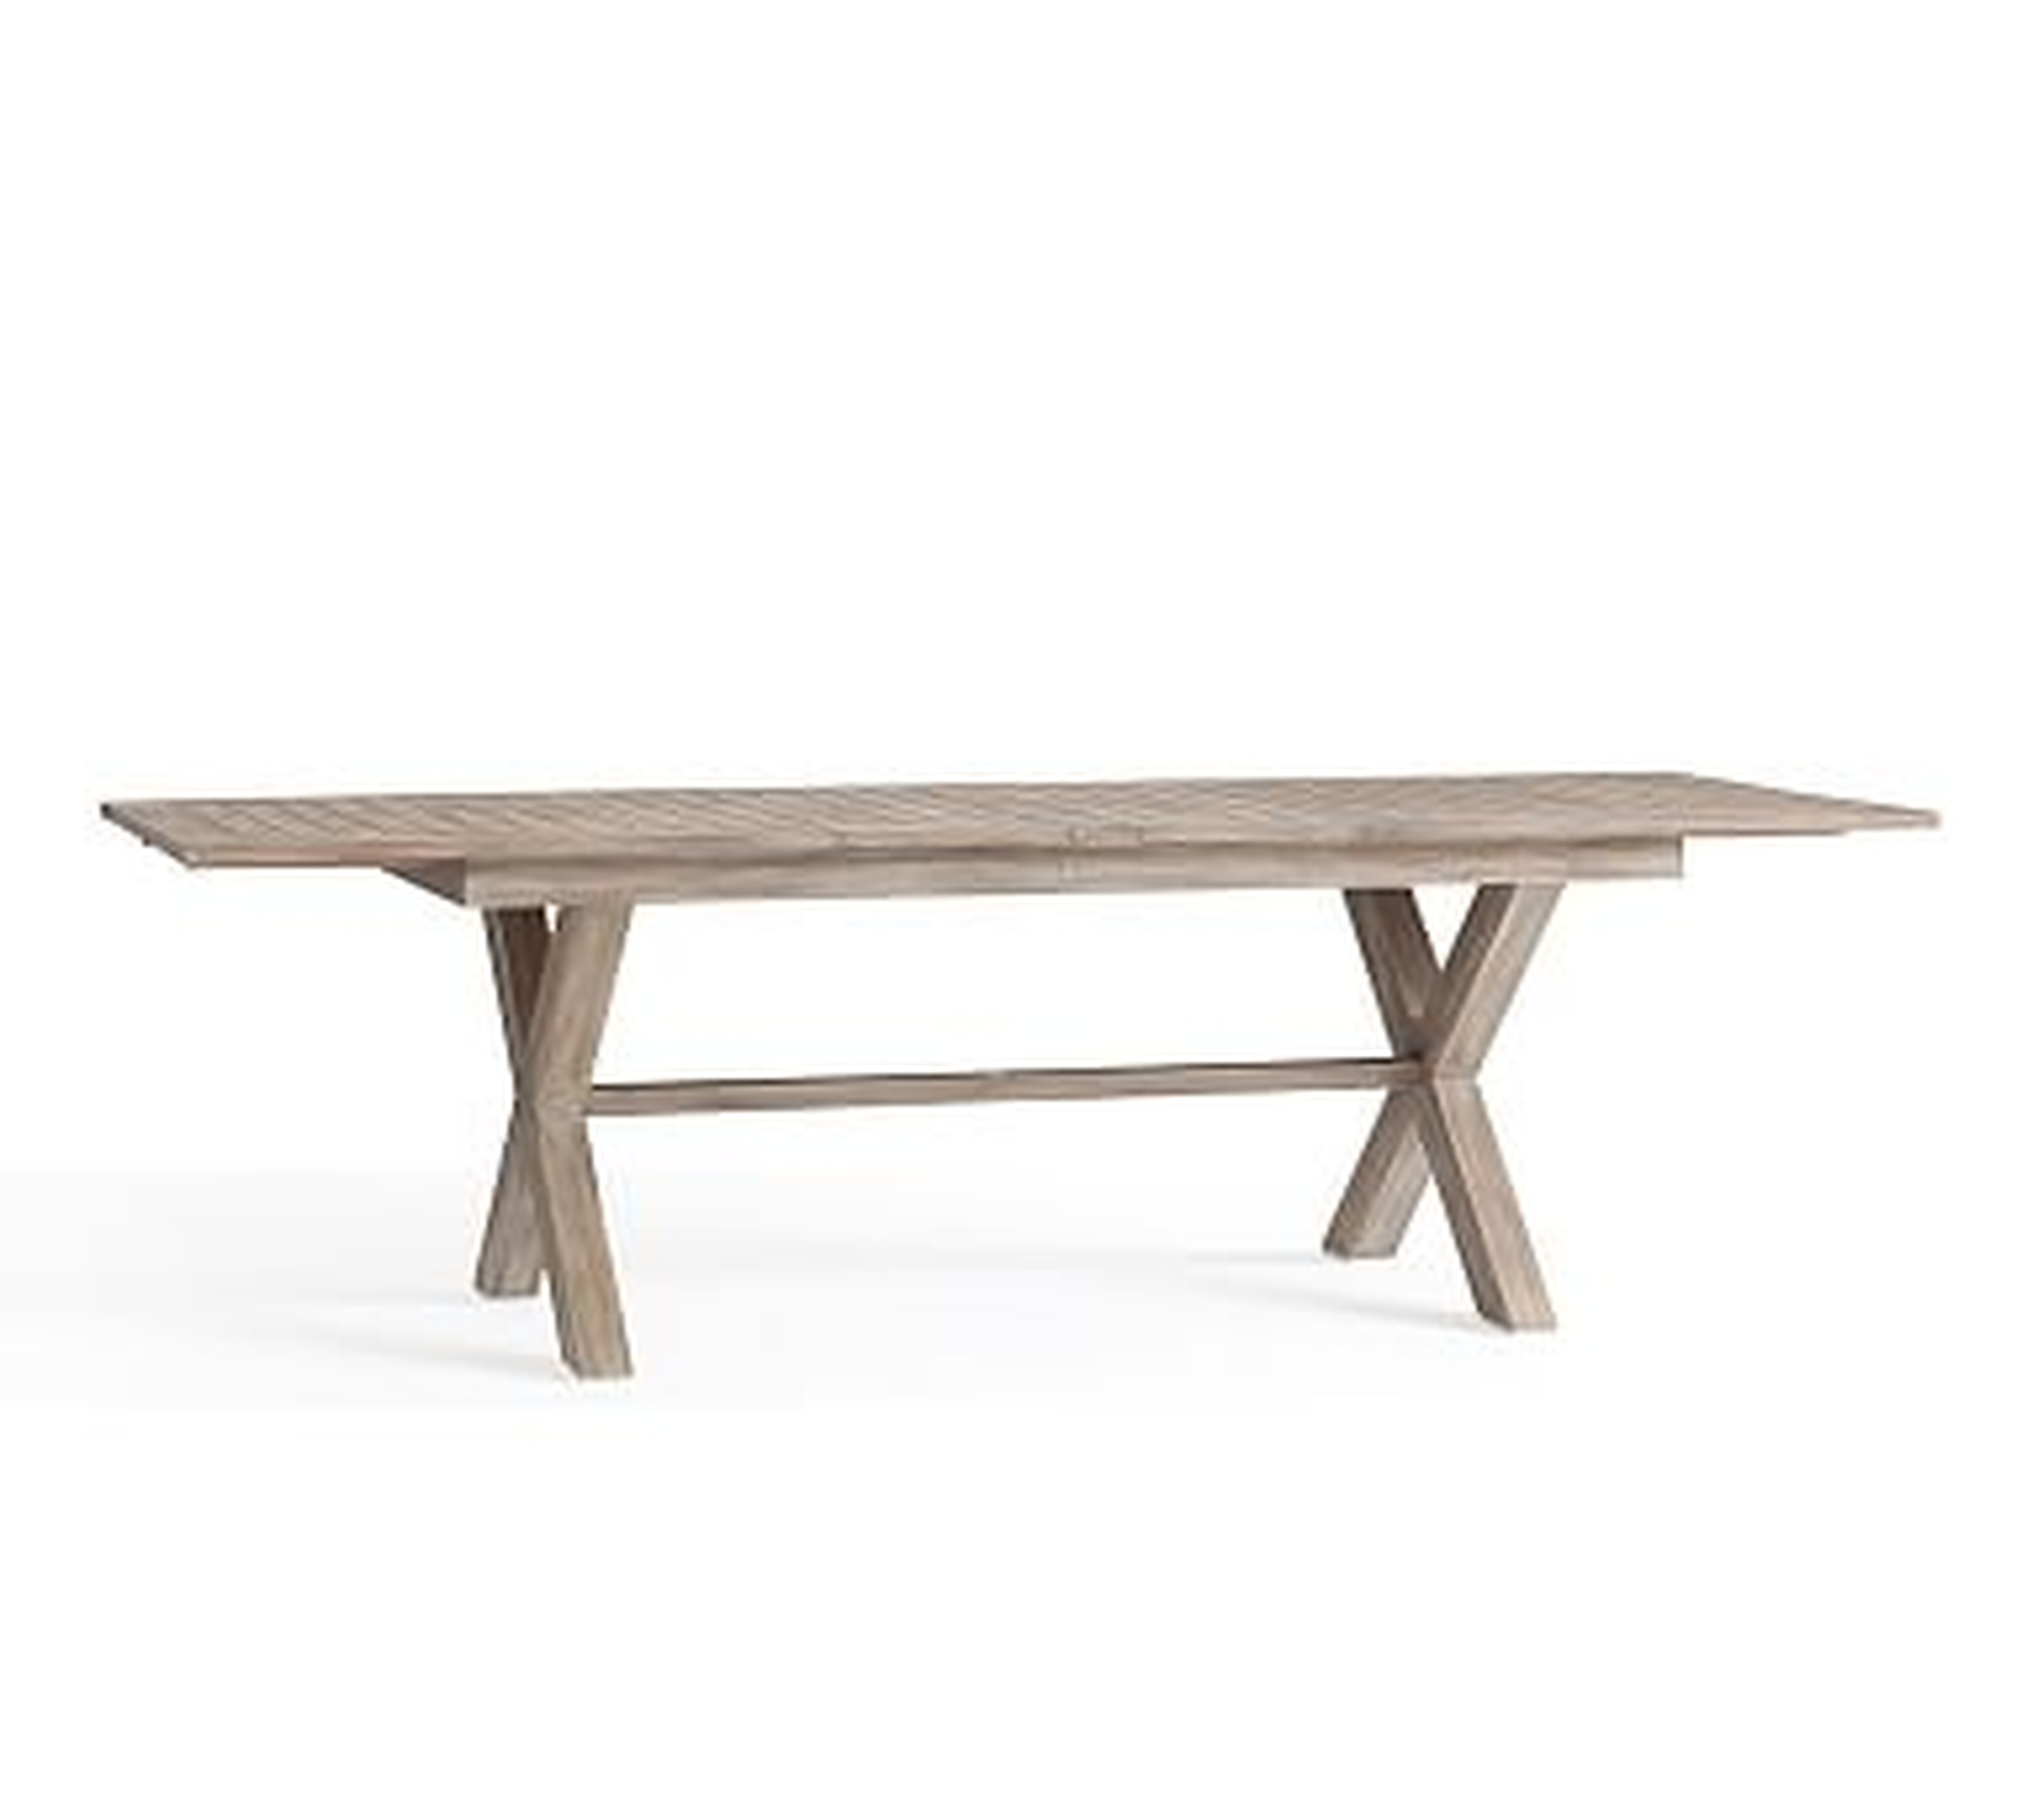 Indio X-Base Rectangular Extending Dining Table, Weathered Gray - Pottery Barn